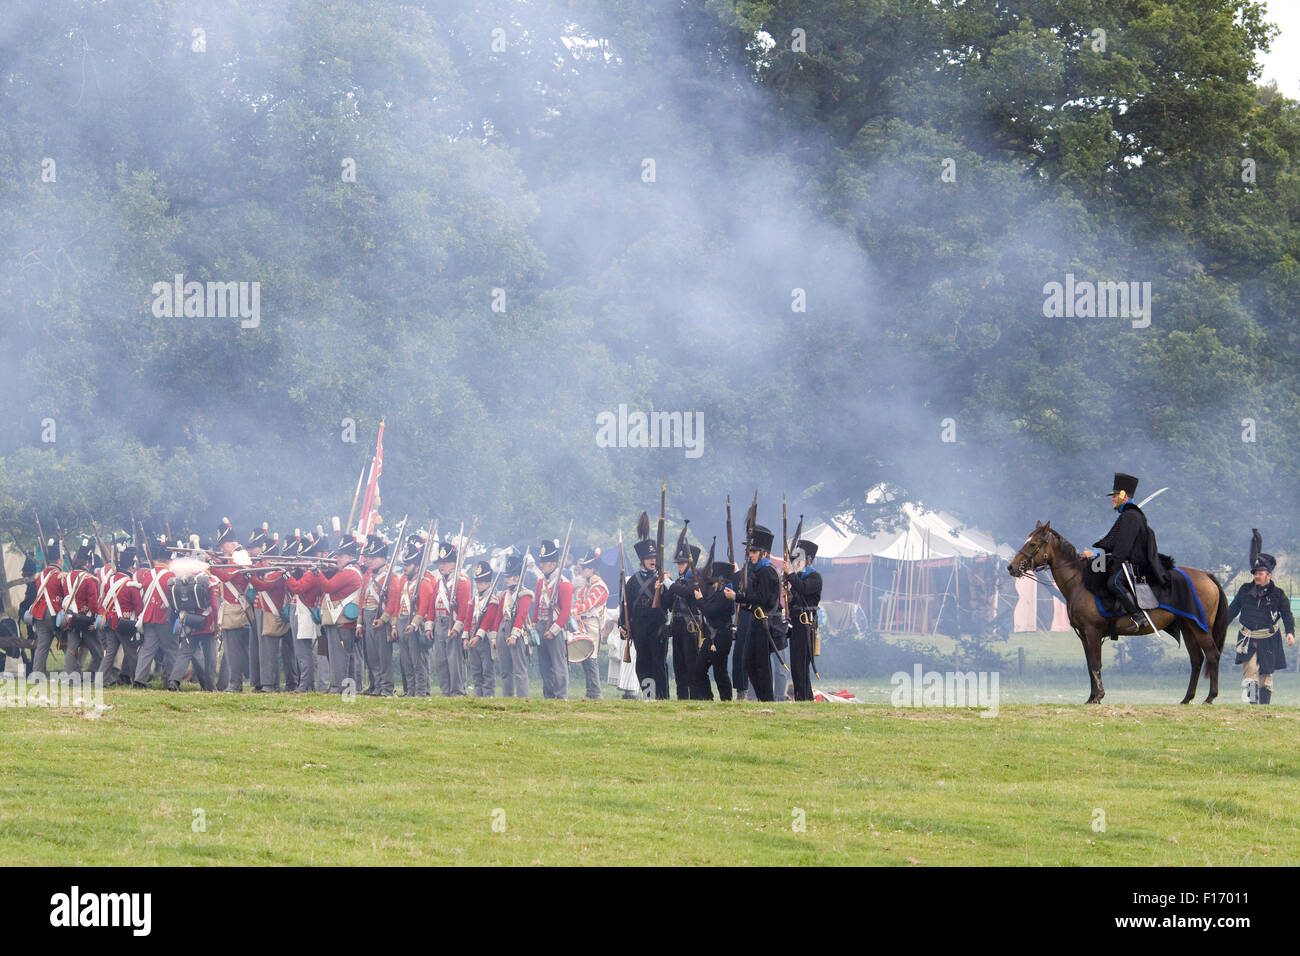 Reenactment of the 33rd Regiment foot soldiers in battle Stock Photo